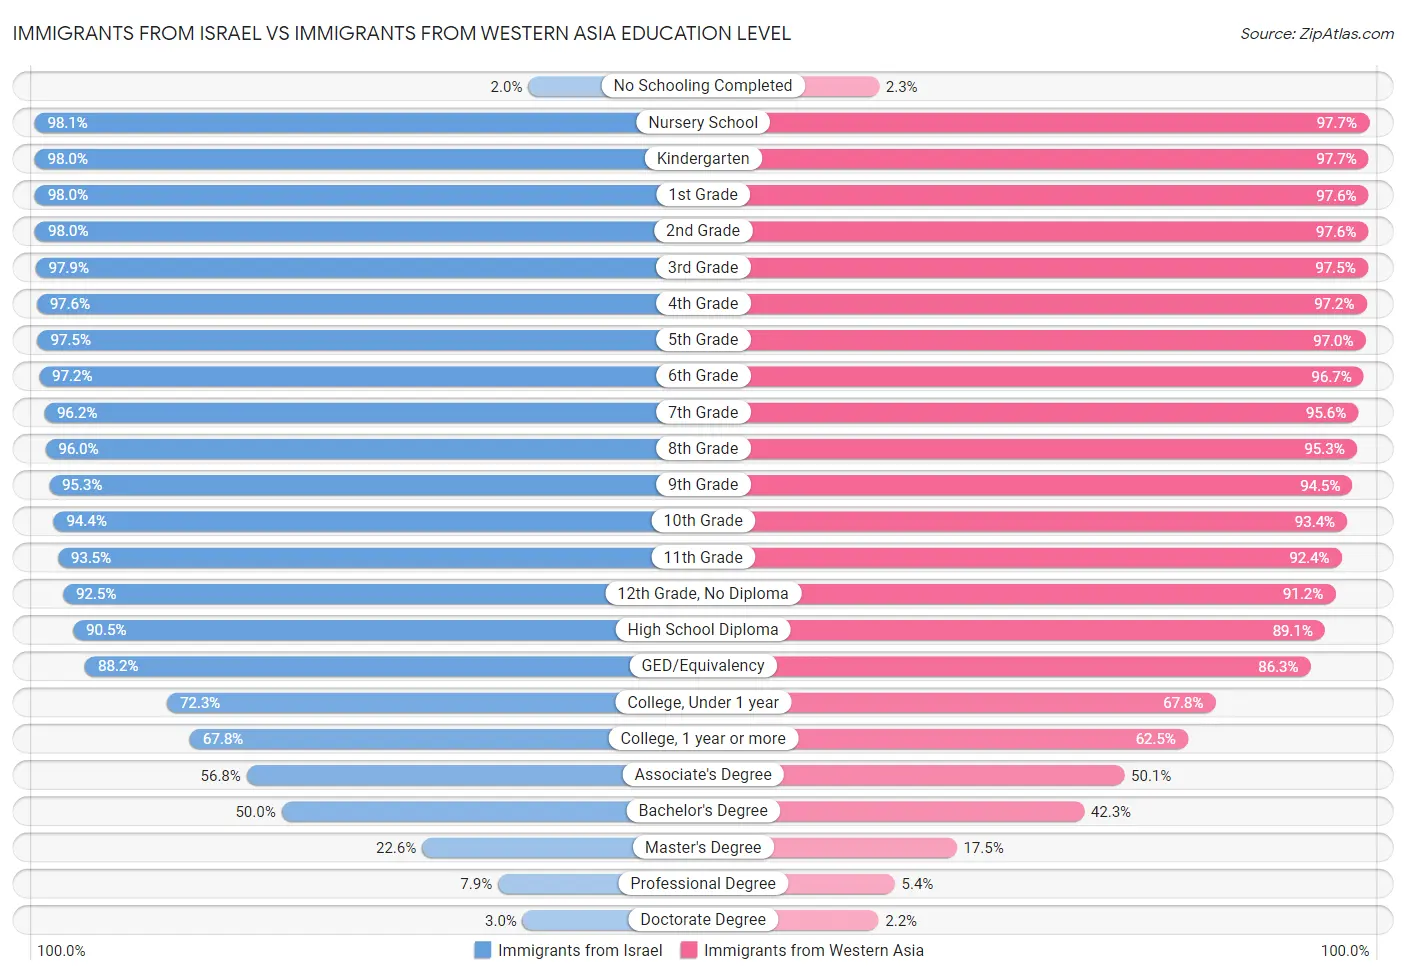 Immigrants from Israel vs Immigrants from Western Asia Education Level